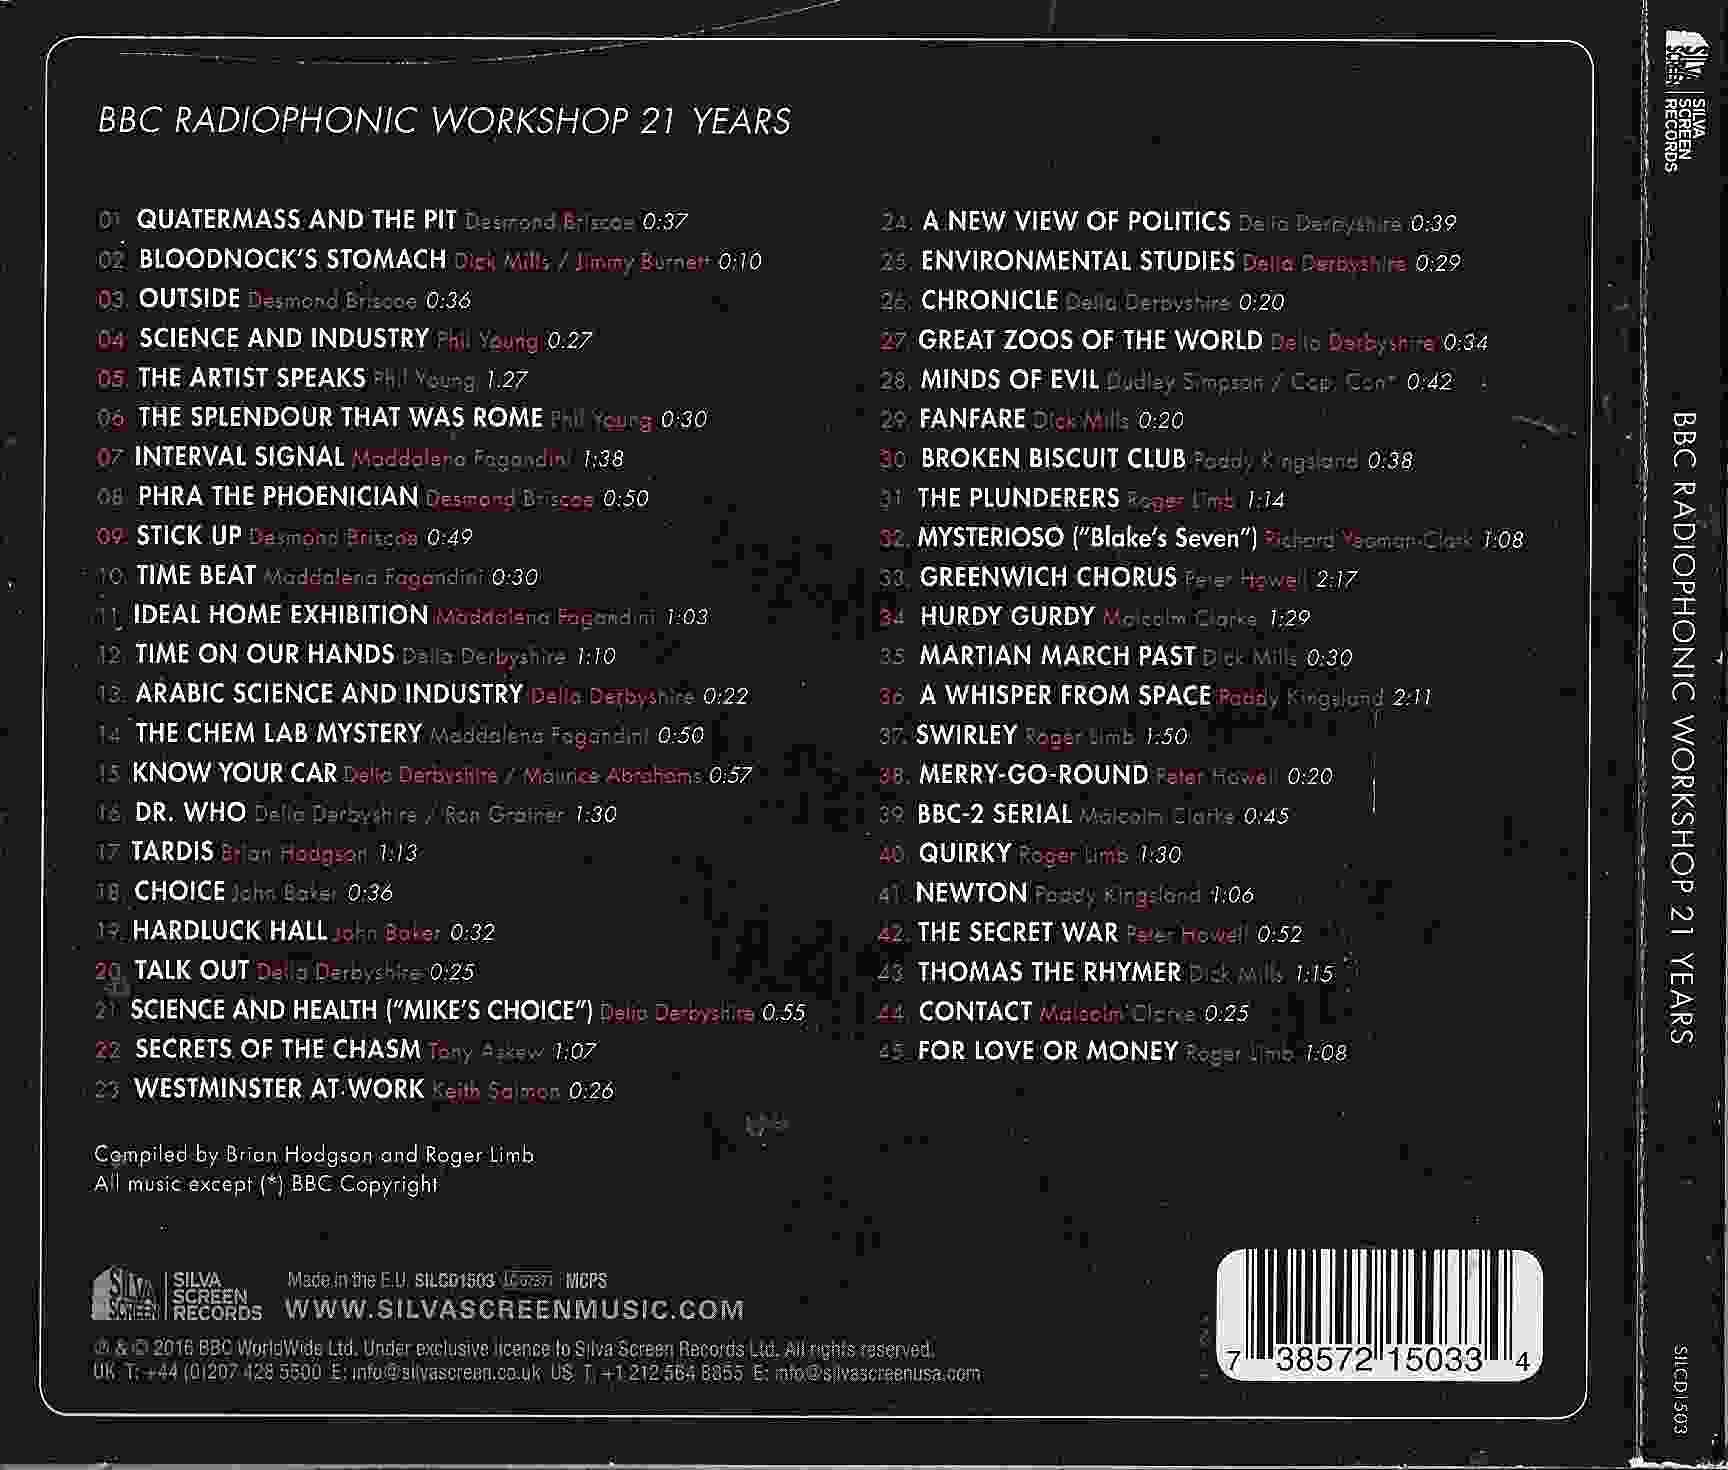 Picture of SILCD 1503 BBC Radiophonic Workshop - 21 by artist BBC Radiophonic Workshop from the BBC records and Tapes library